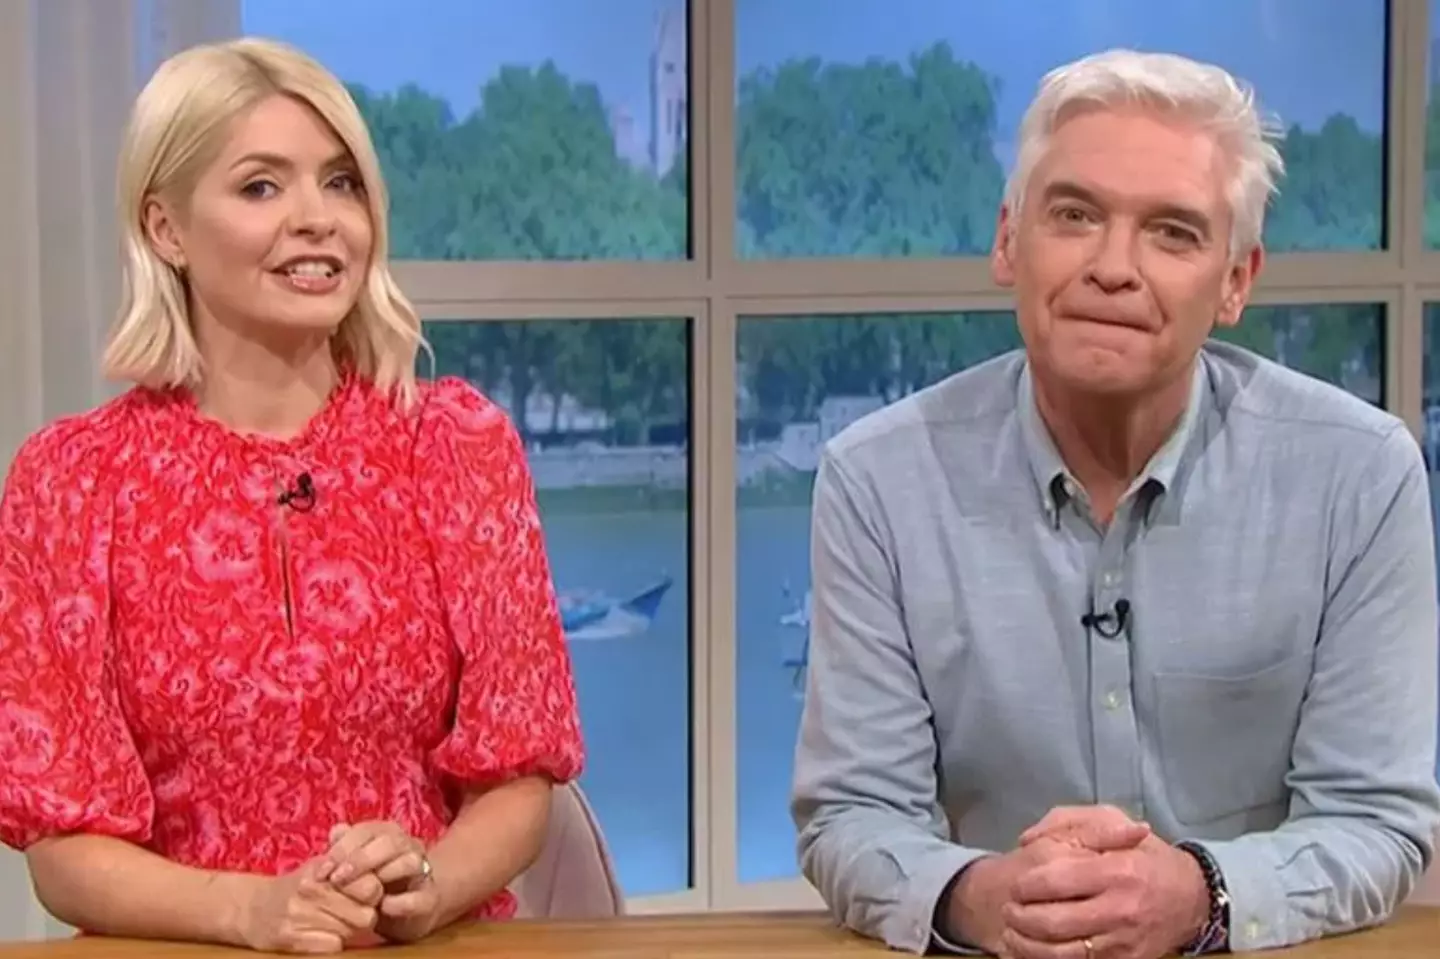 Willoughby's long-time co-host Phillip Schofield left the show earlier this year.